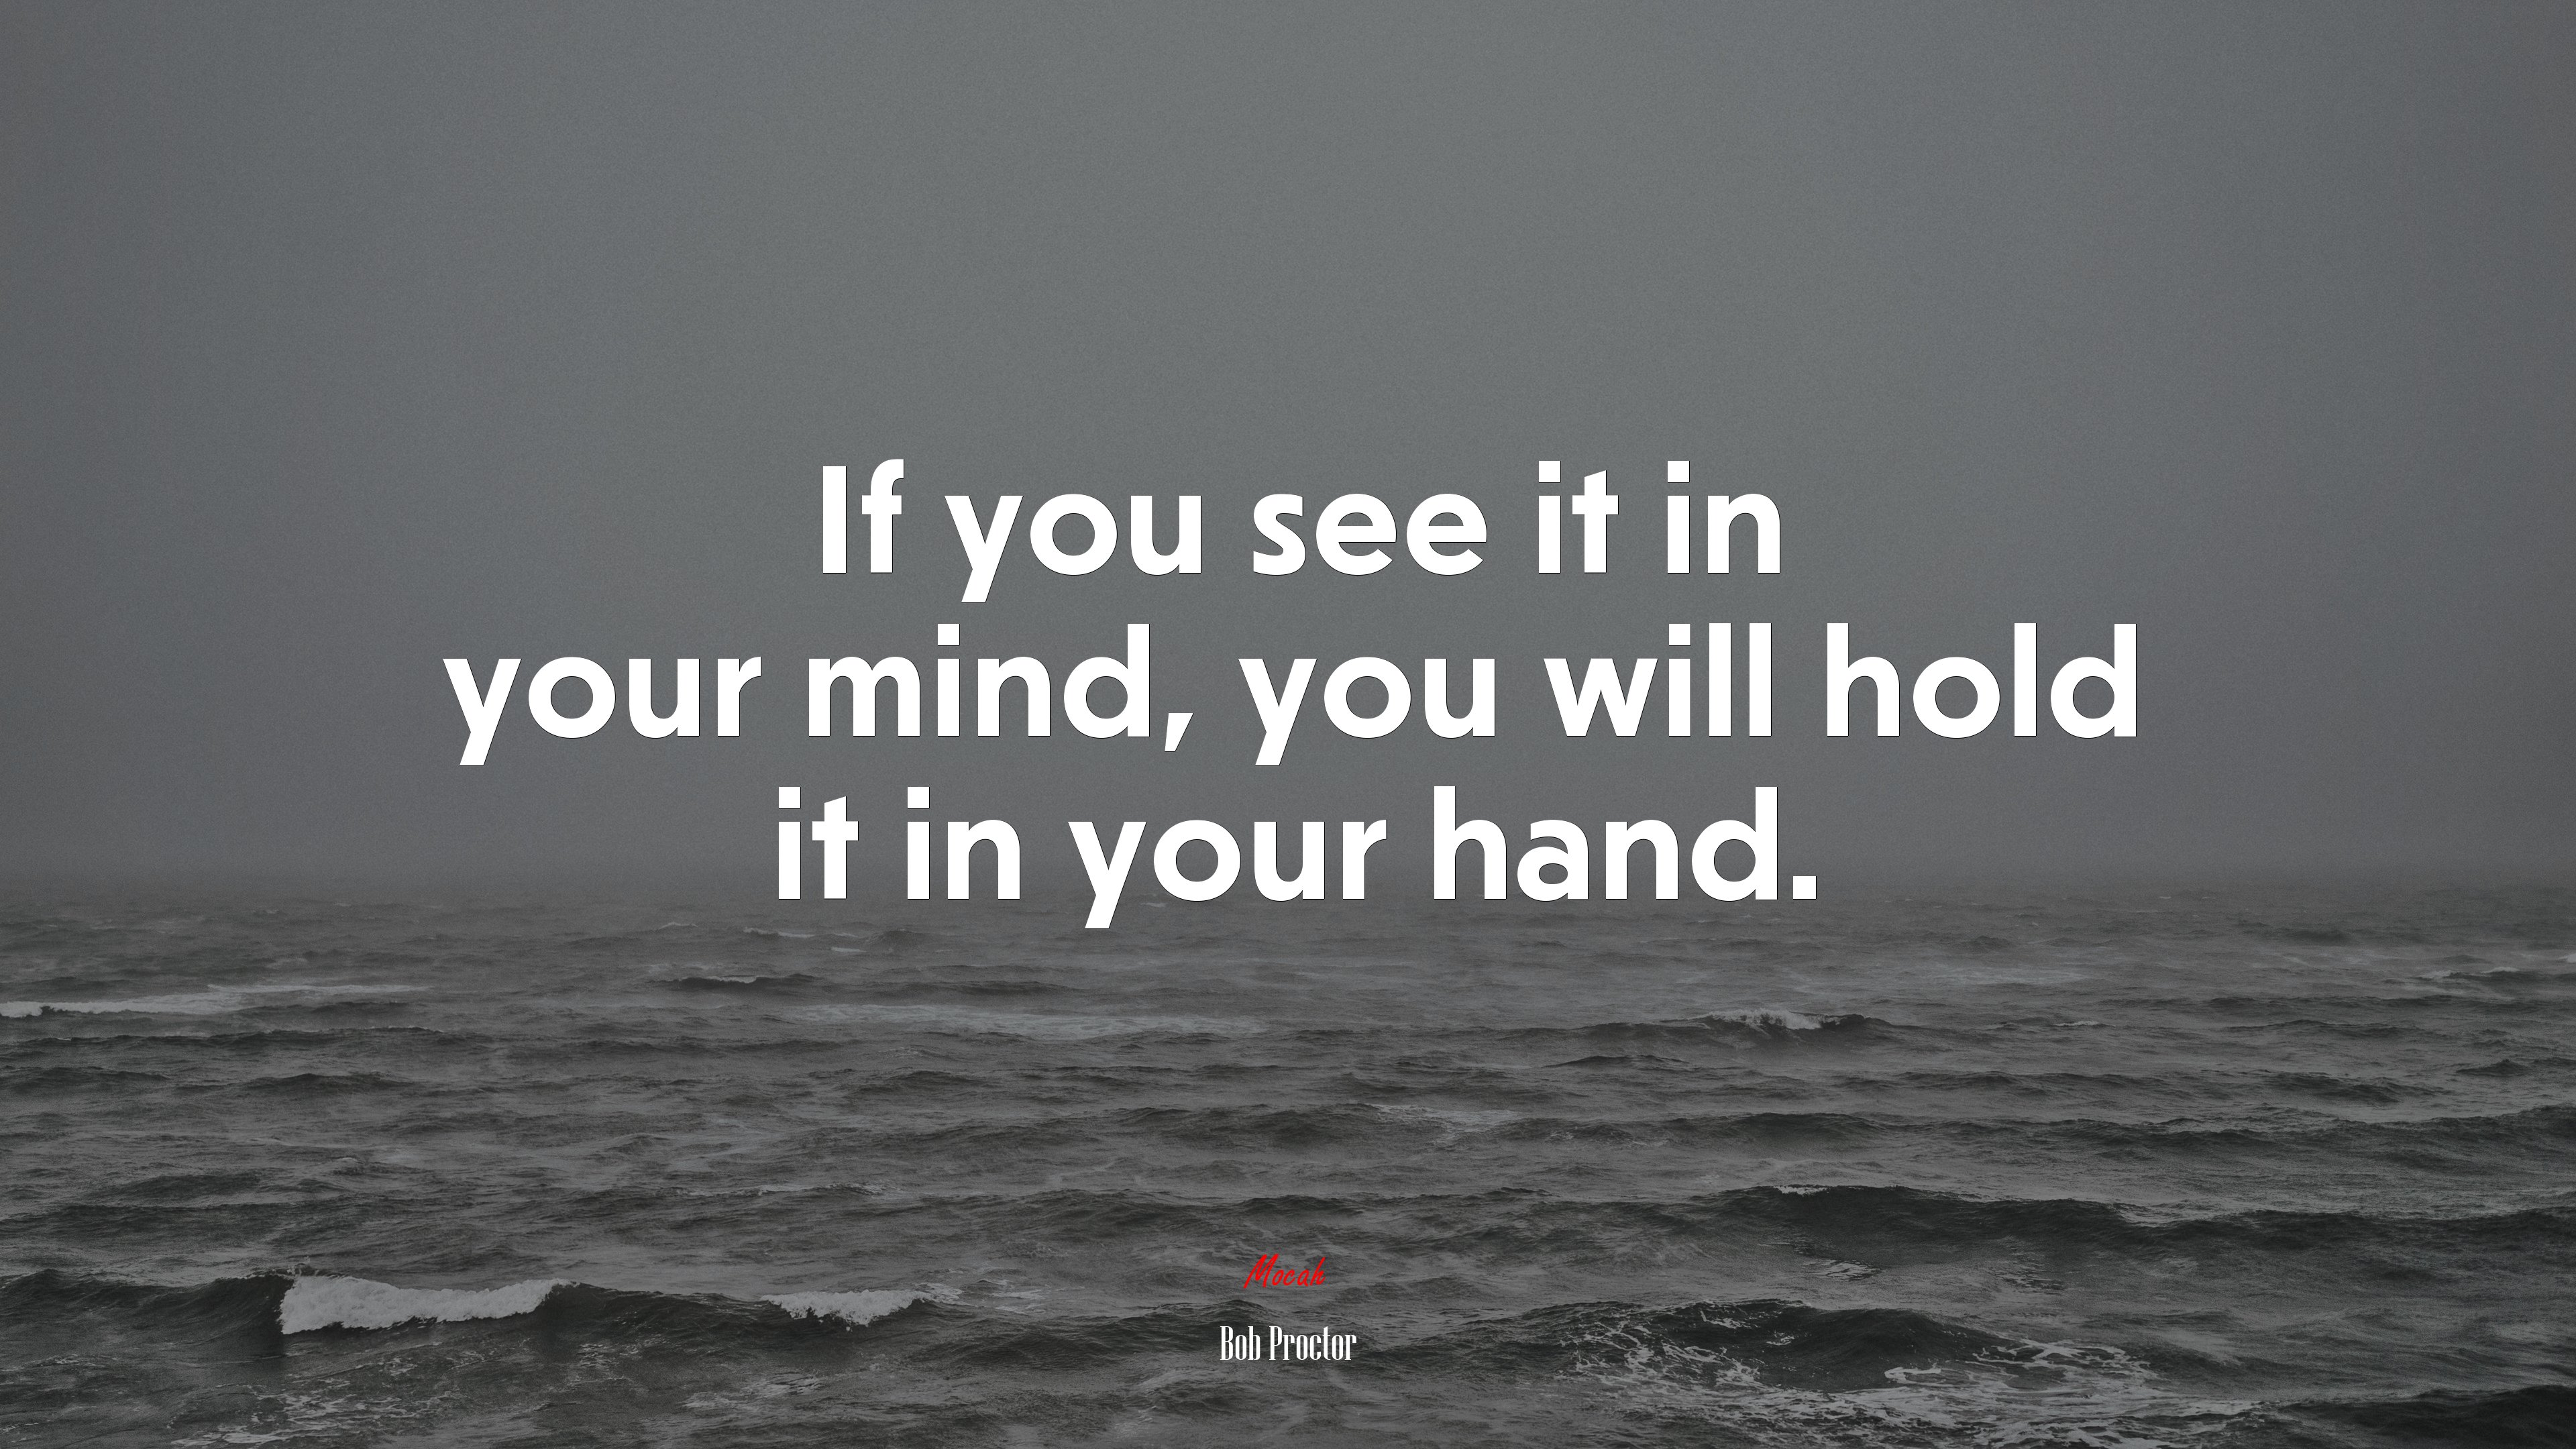 If you see it in your mind, you will hold it in your hand. Bob Proctor quote Gallery HD Wallpaper